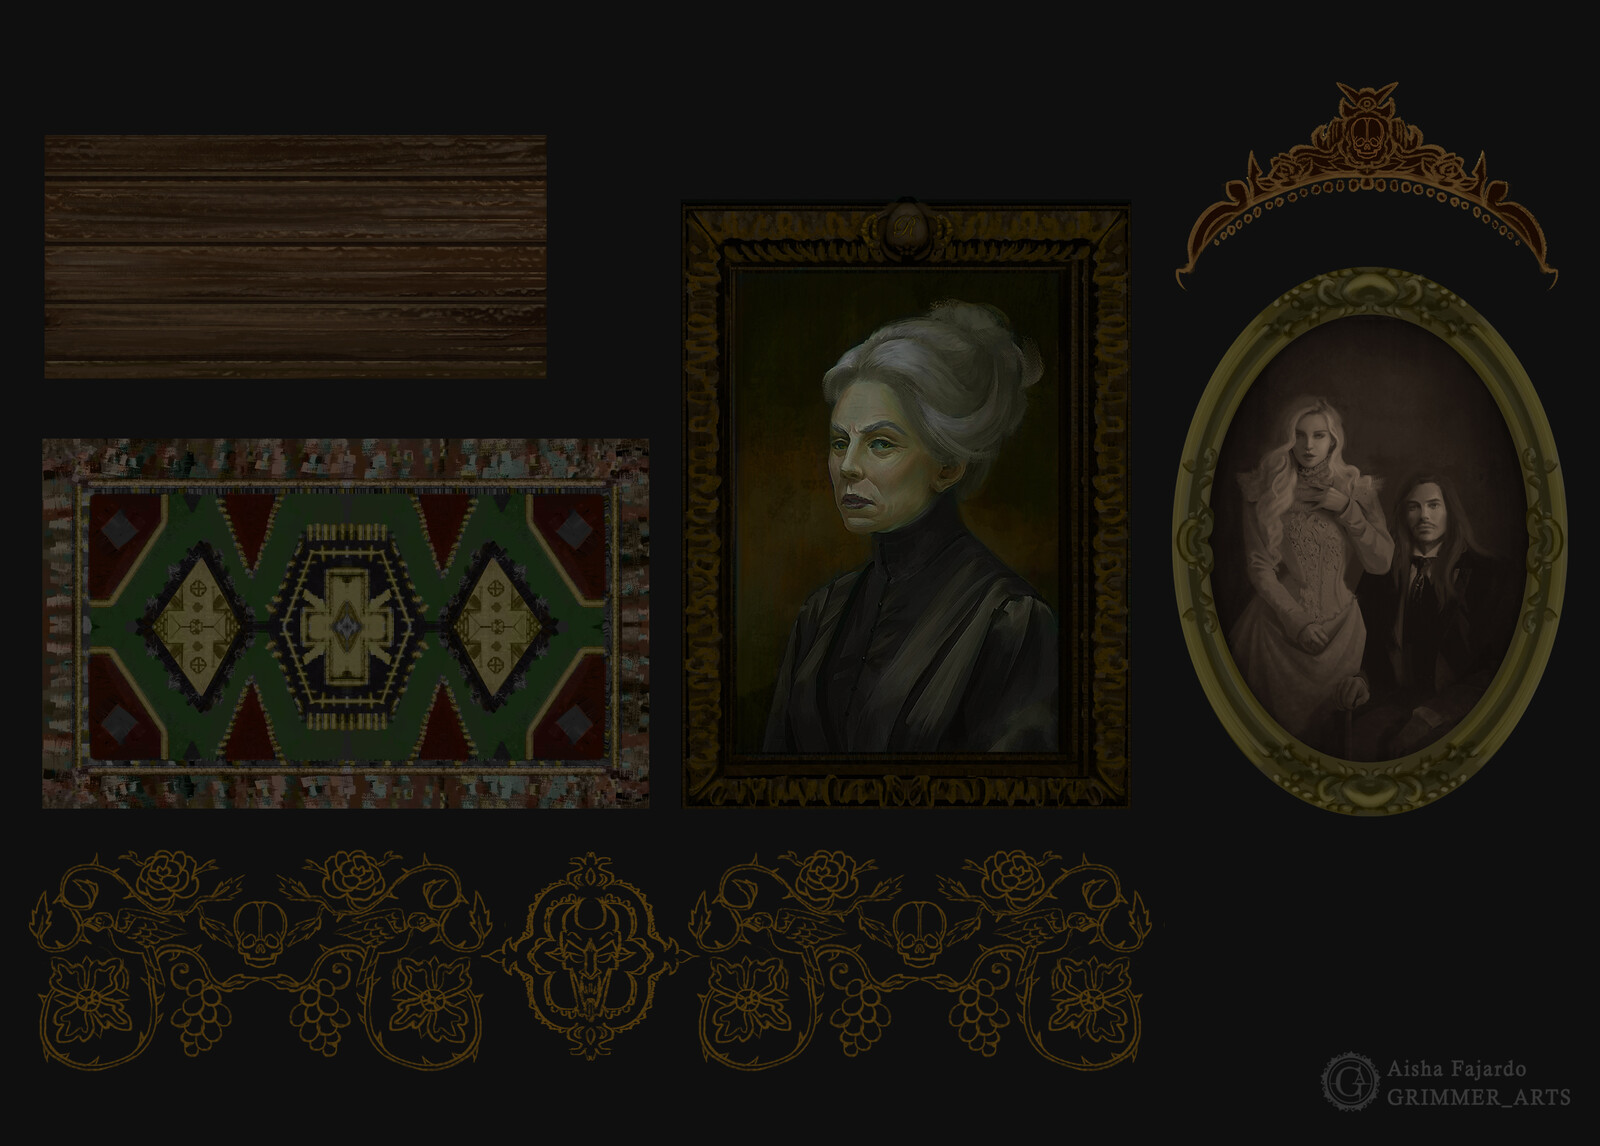 Some asset design and texture painting.